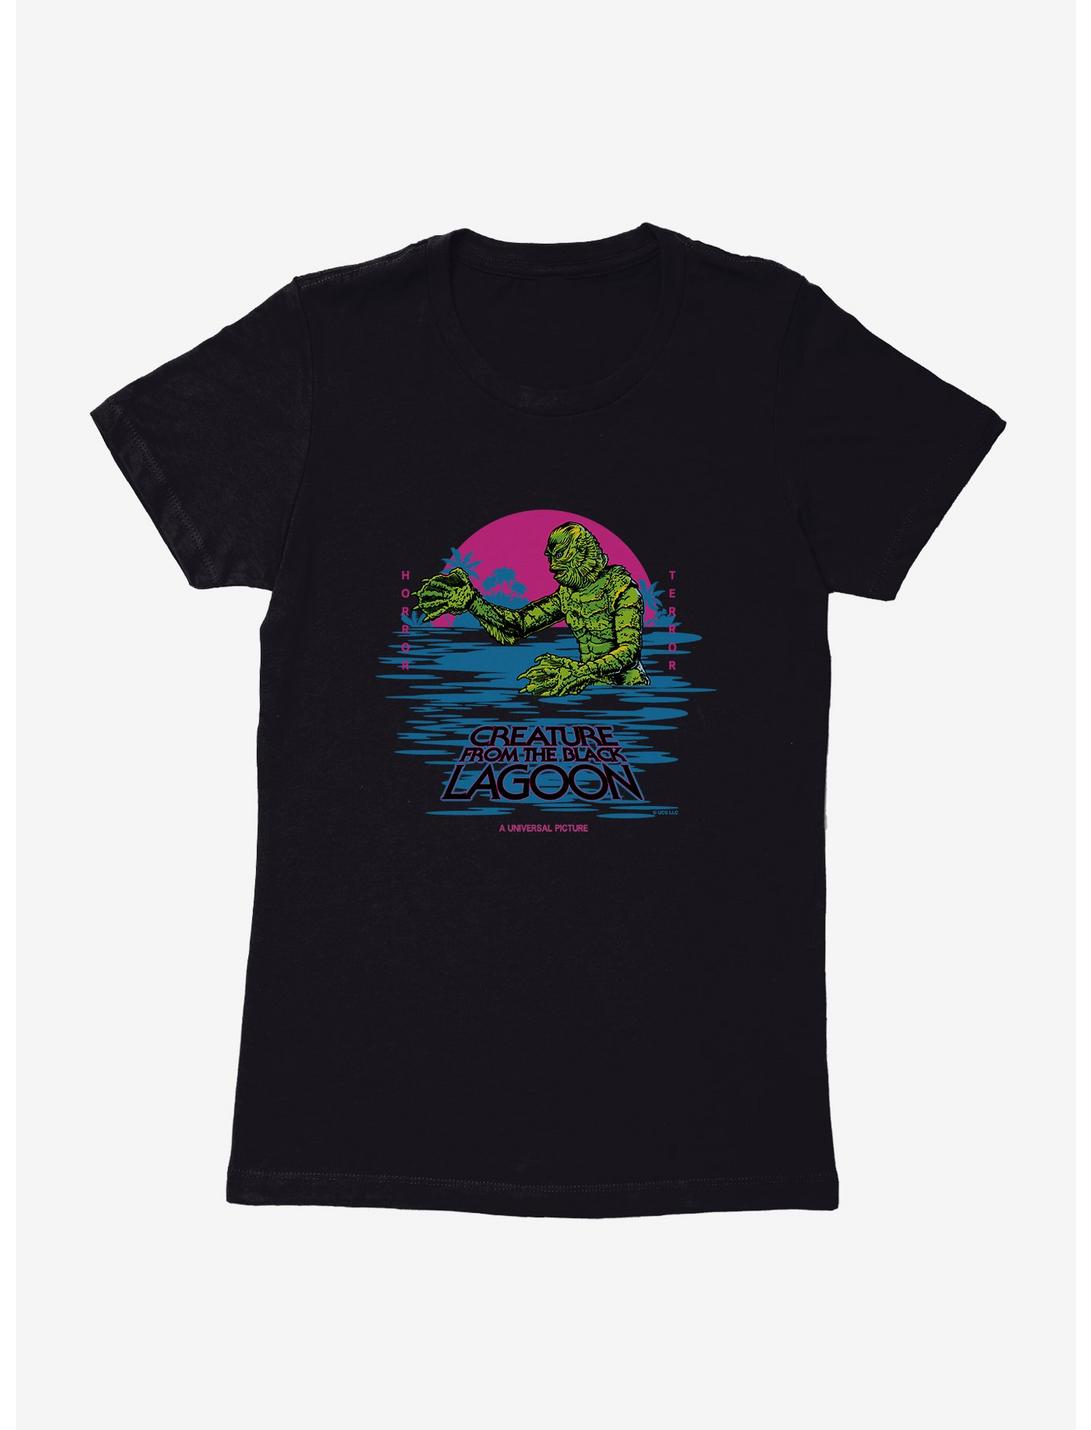 Creature From The Black Lagoon Pastel Title Art Womens T-Shirt, BLACK, hi-res